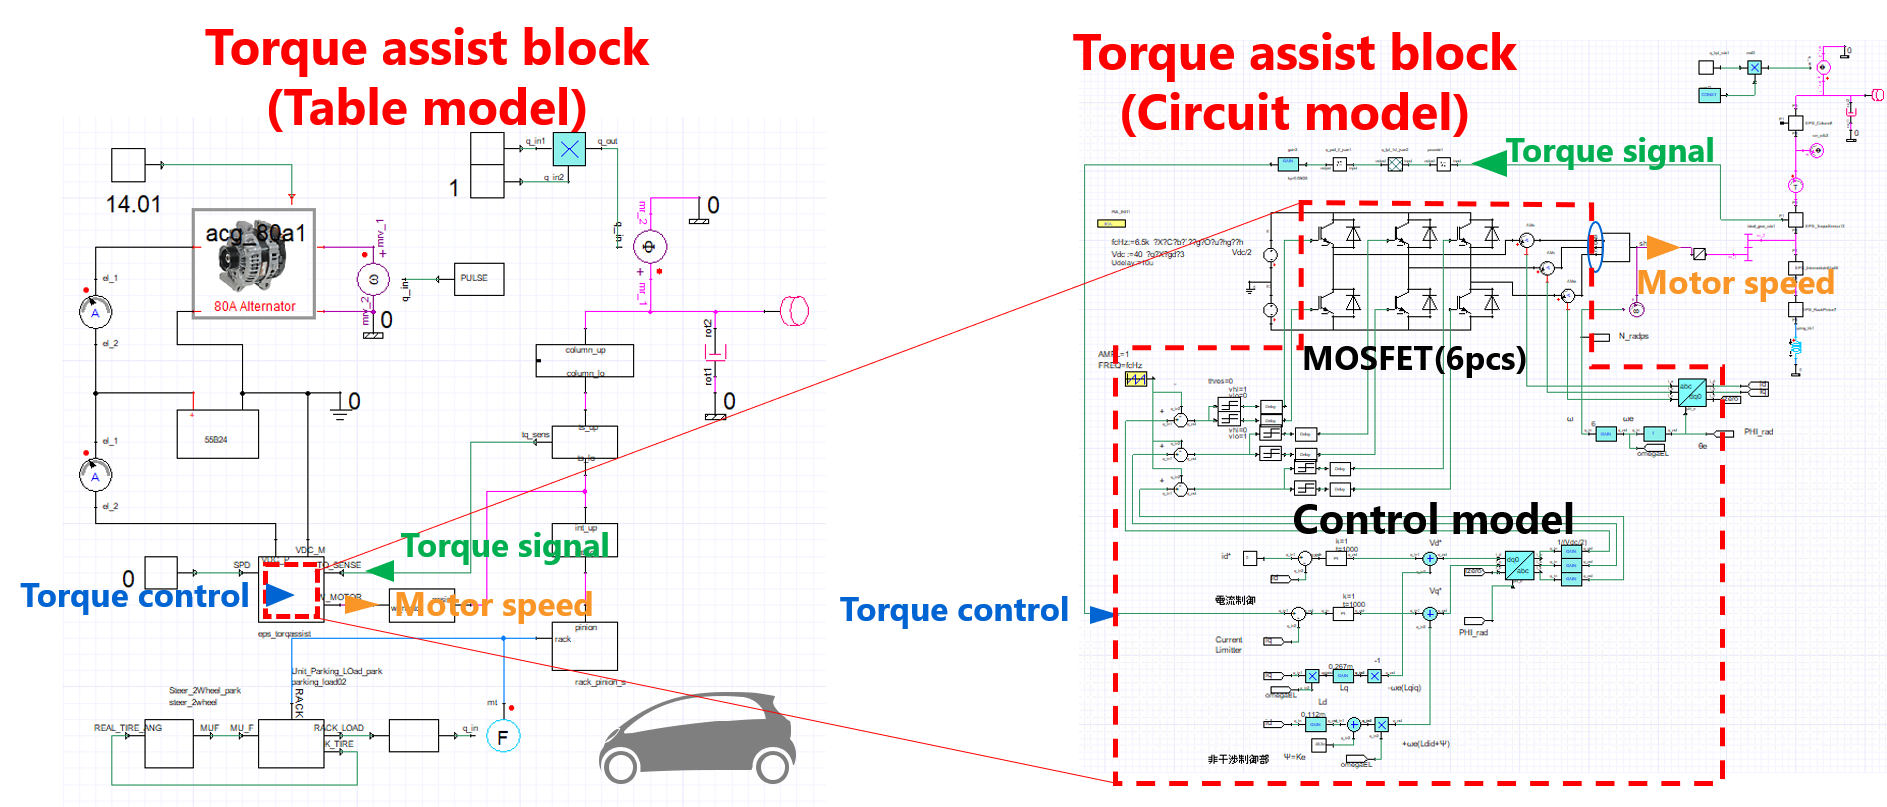 Table model and Circuit model